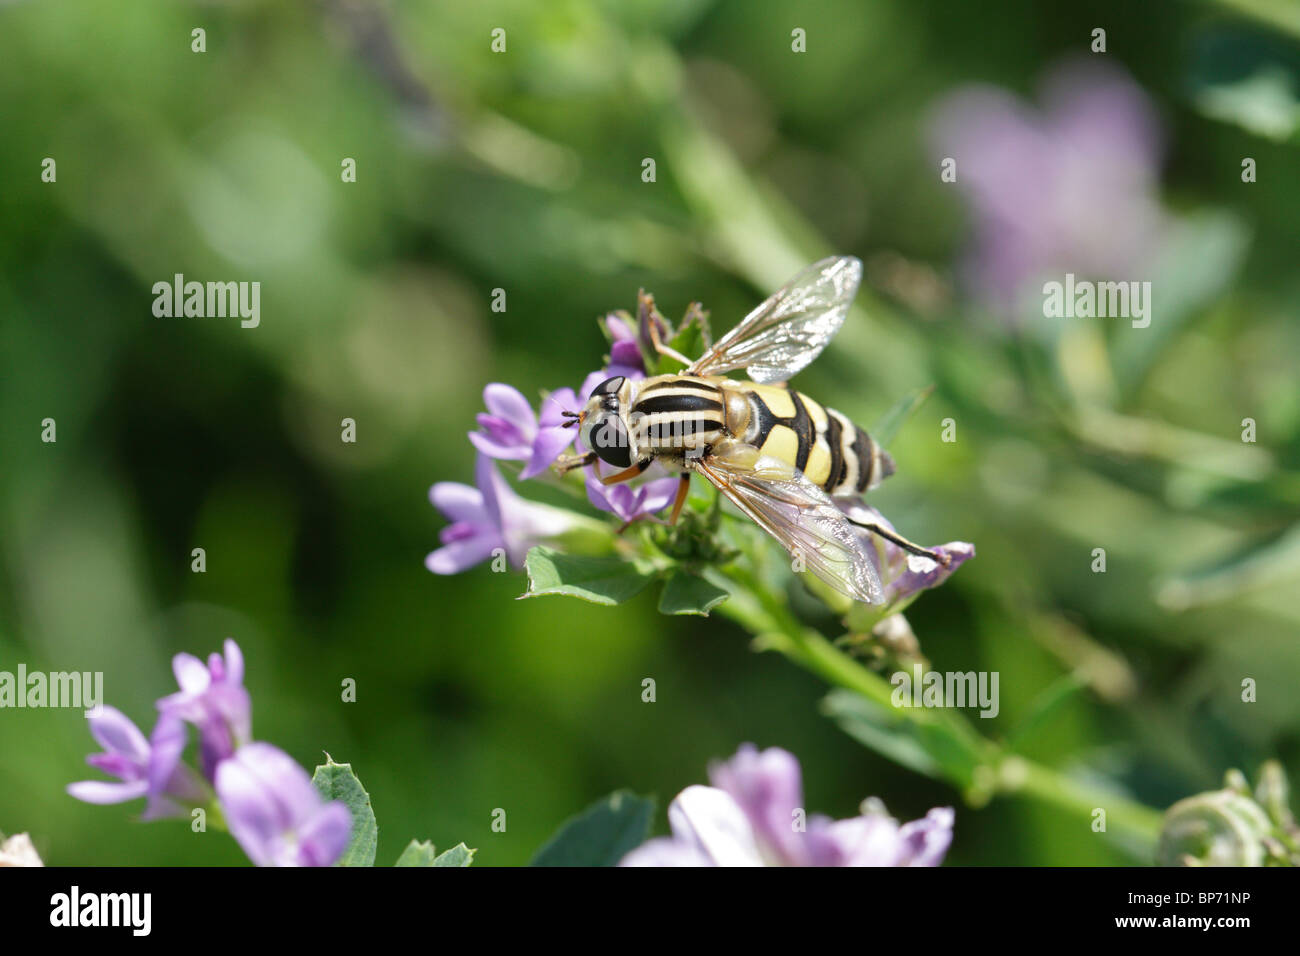 Helophilus trivittatus, a hover fly, on a thistle Stock Photo